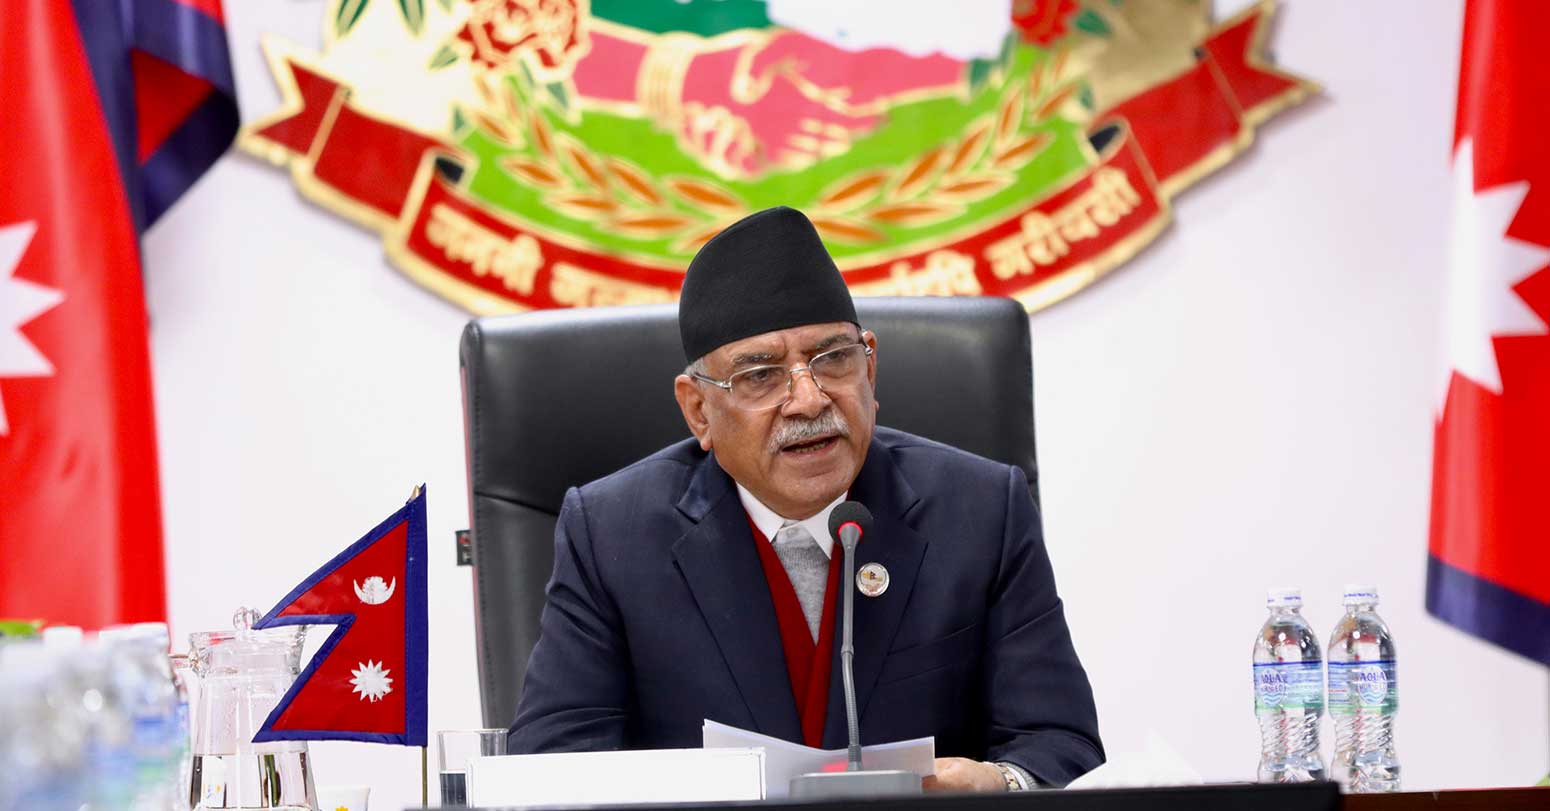 Health insurance should be made more effective: Prime Minister Prachanda